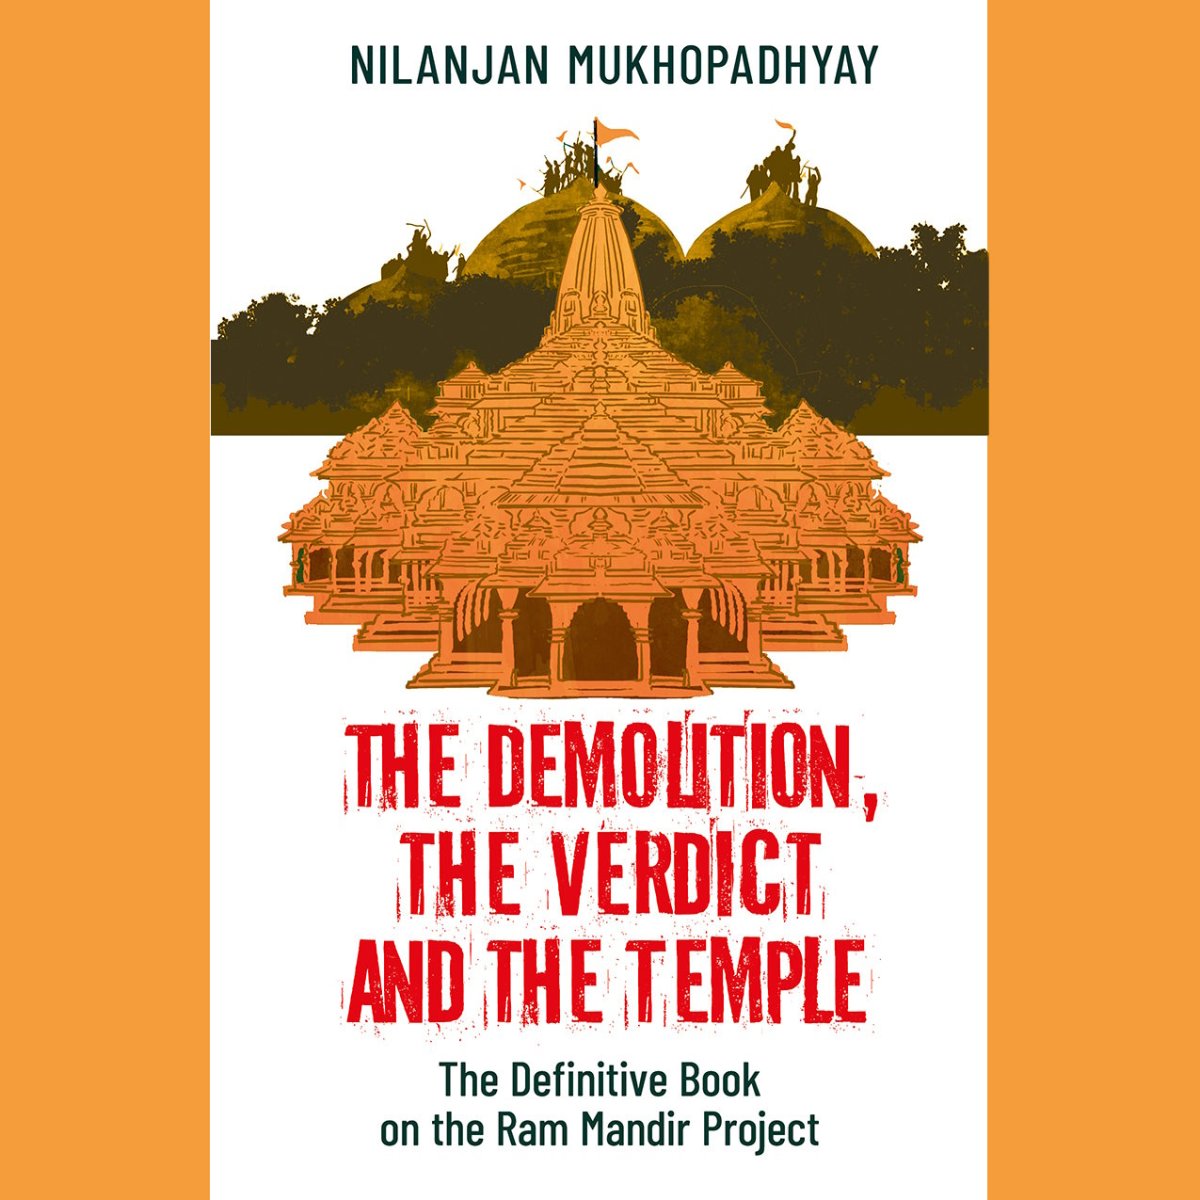 The Demolition, the Verdict and the Temple: An Excerpt